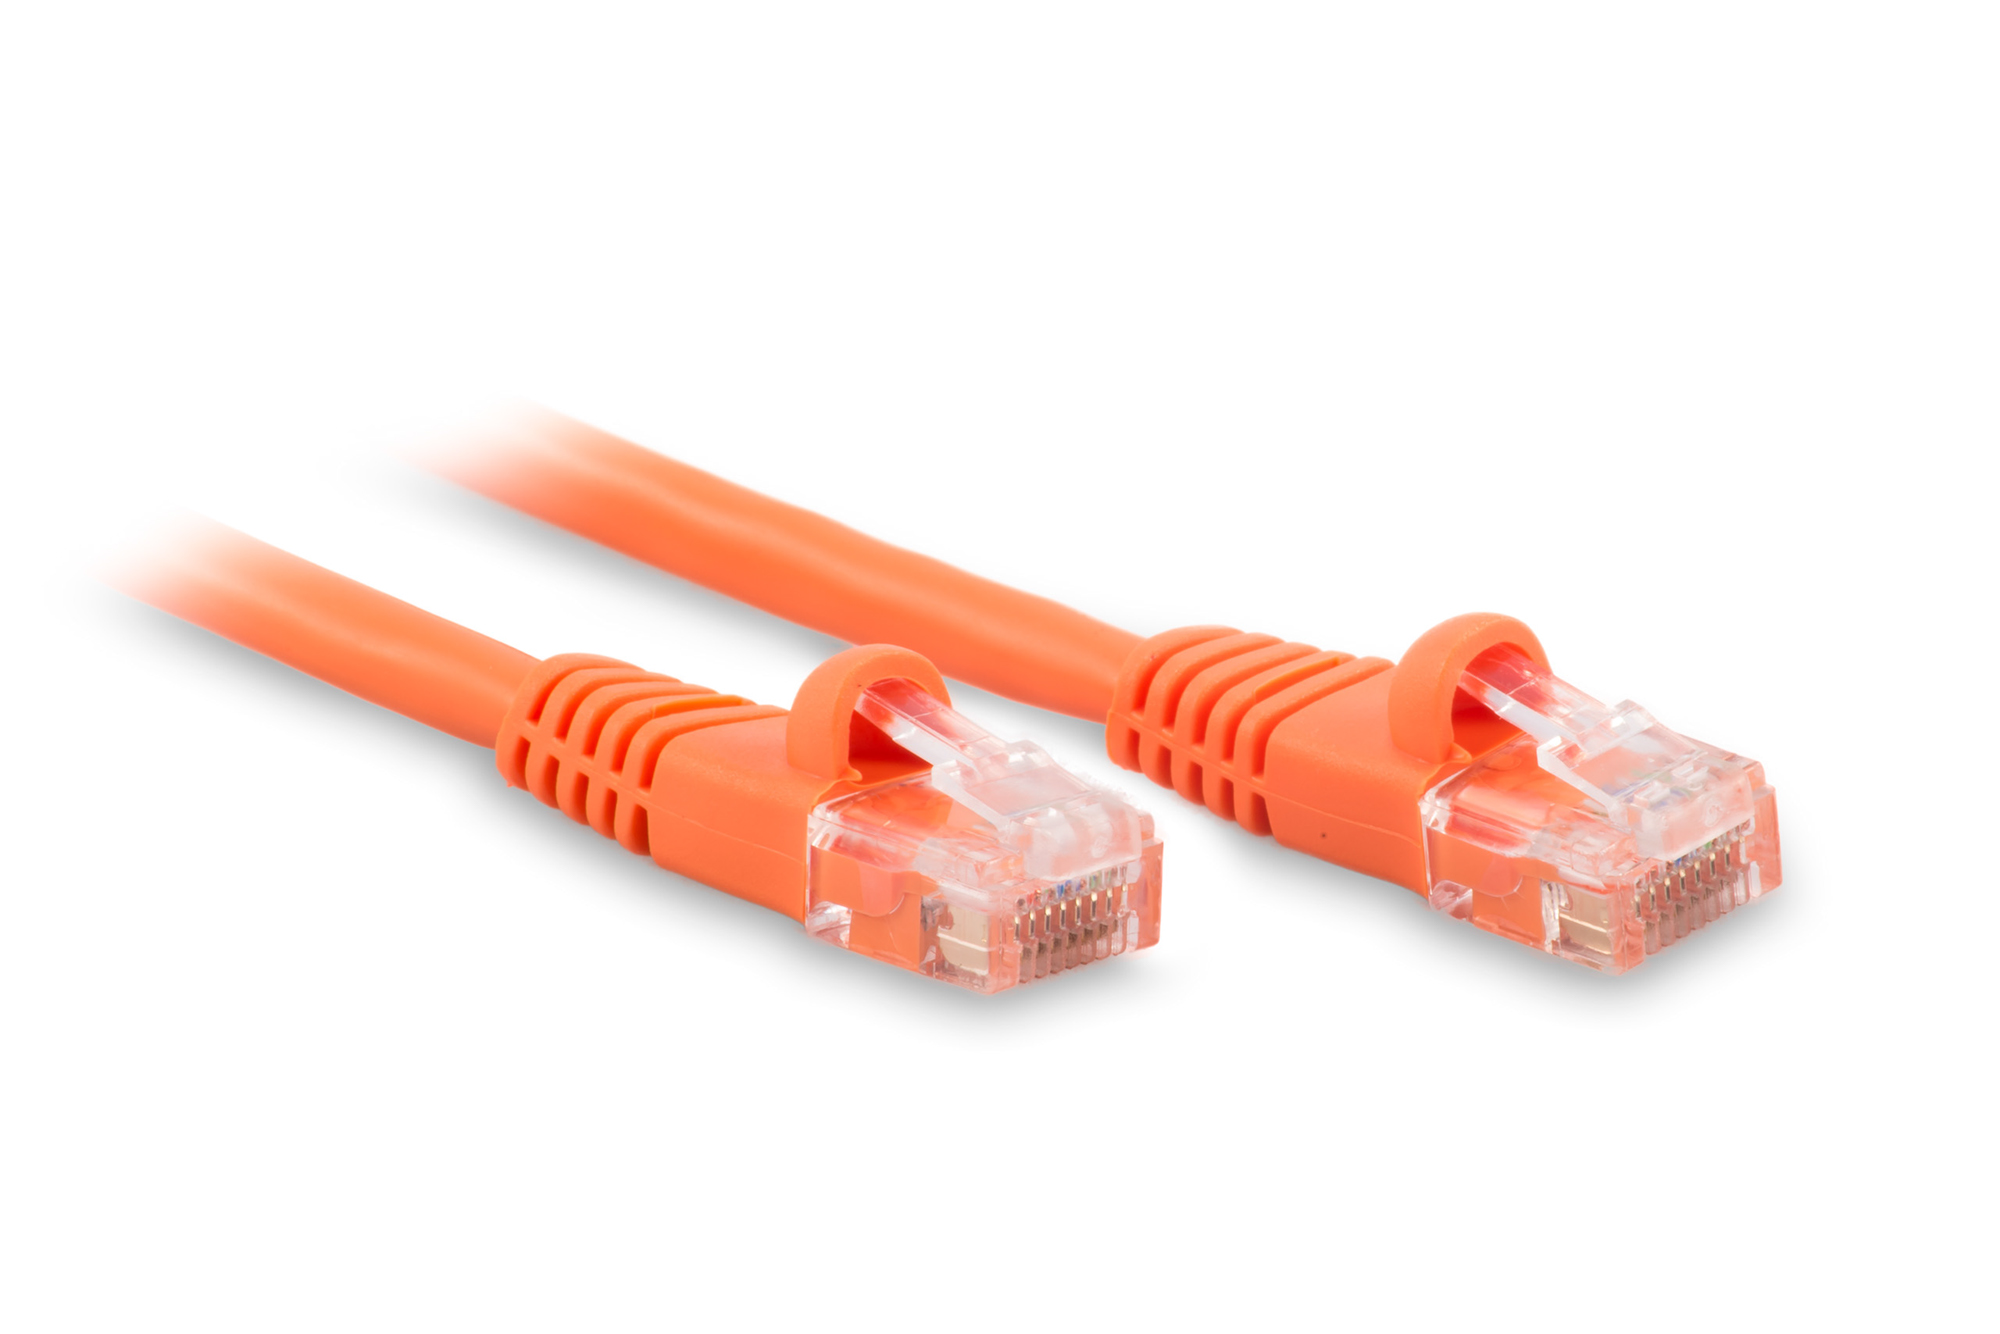 40ft Cat6 Ethernet Patch Cable - Orange Color - Snagless Boot